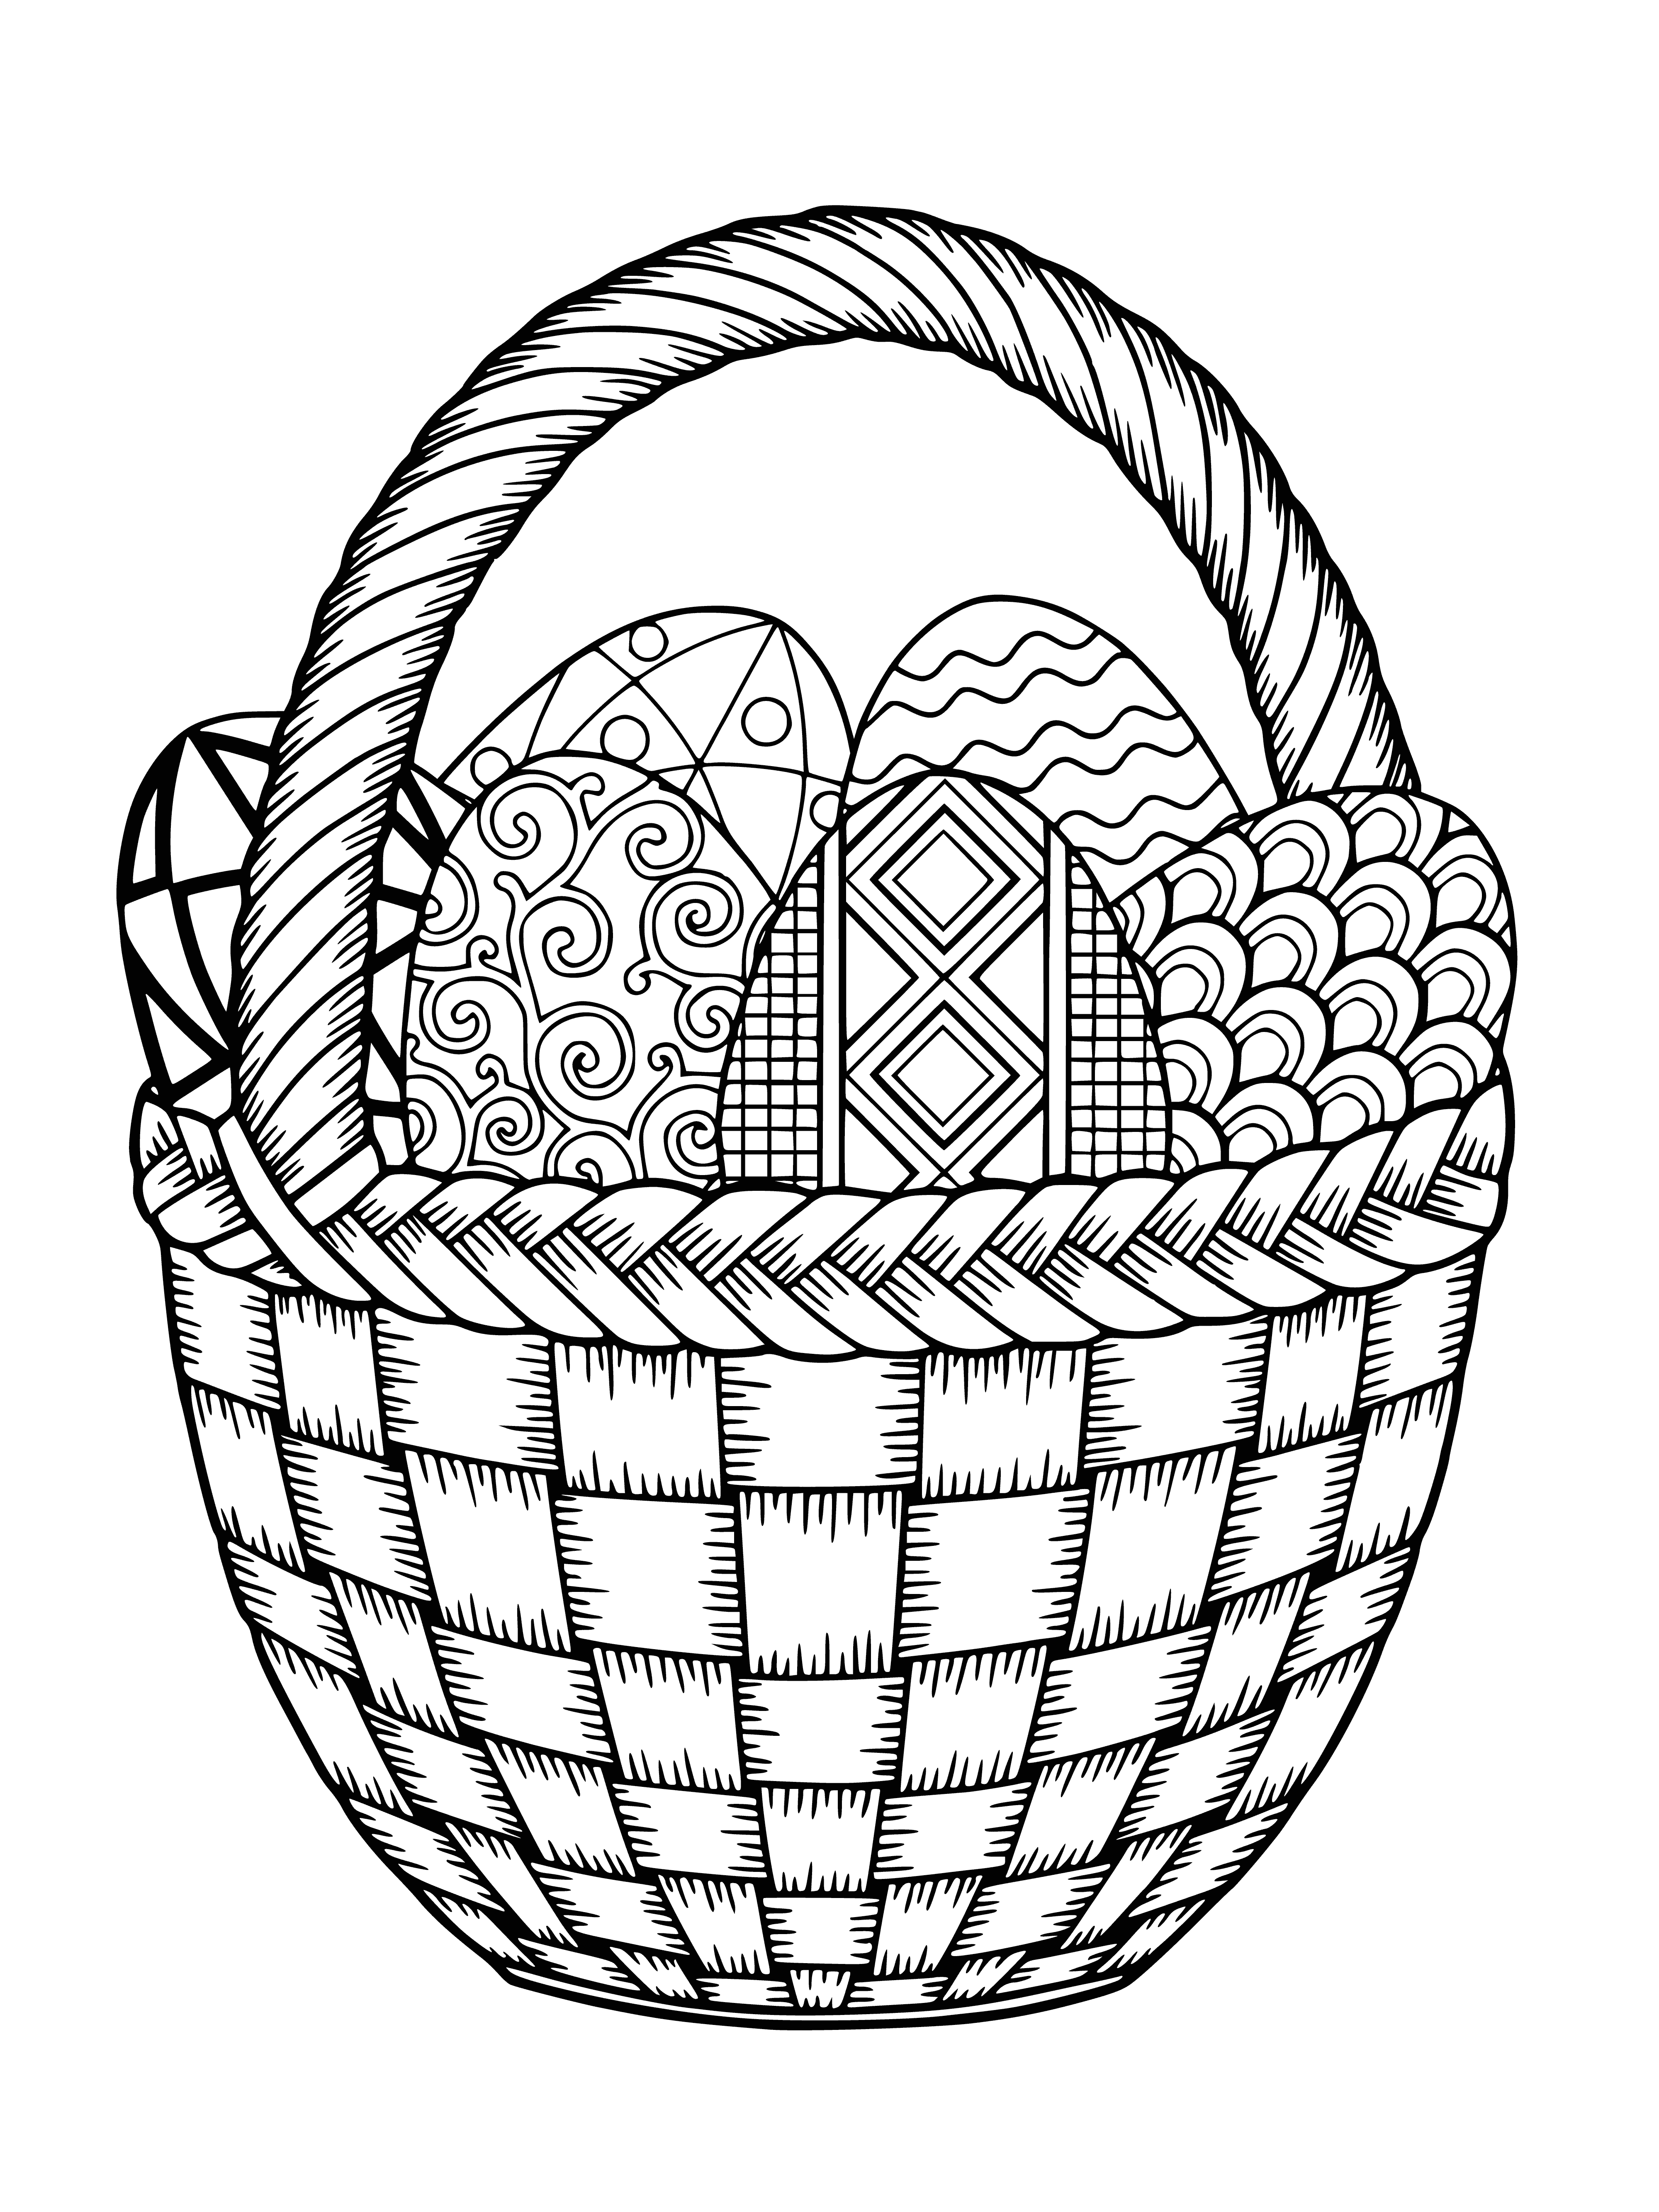 coloring page: A basket of Easter eggs, some patterned, some solid, with a bunny in it. #Easter #Baskets